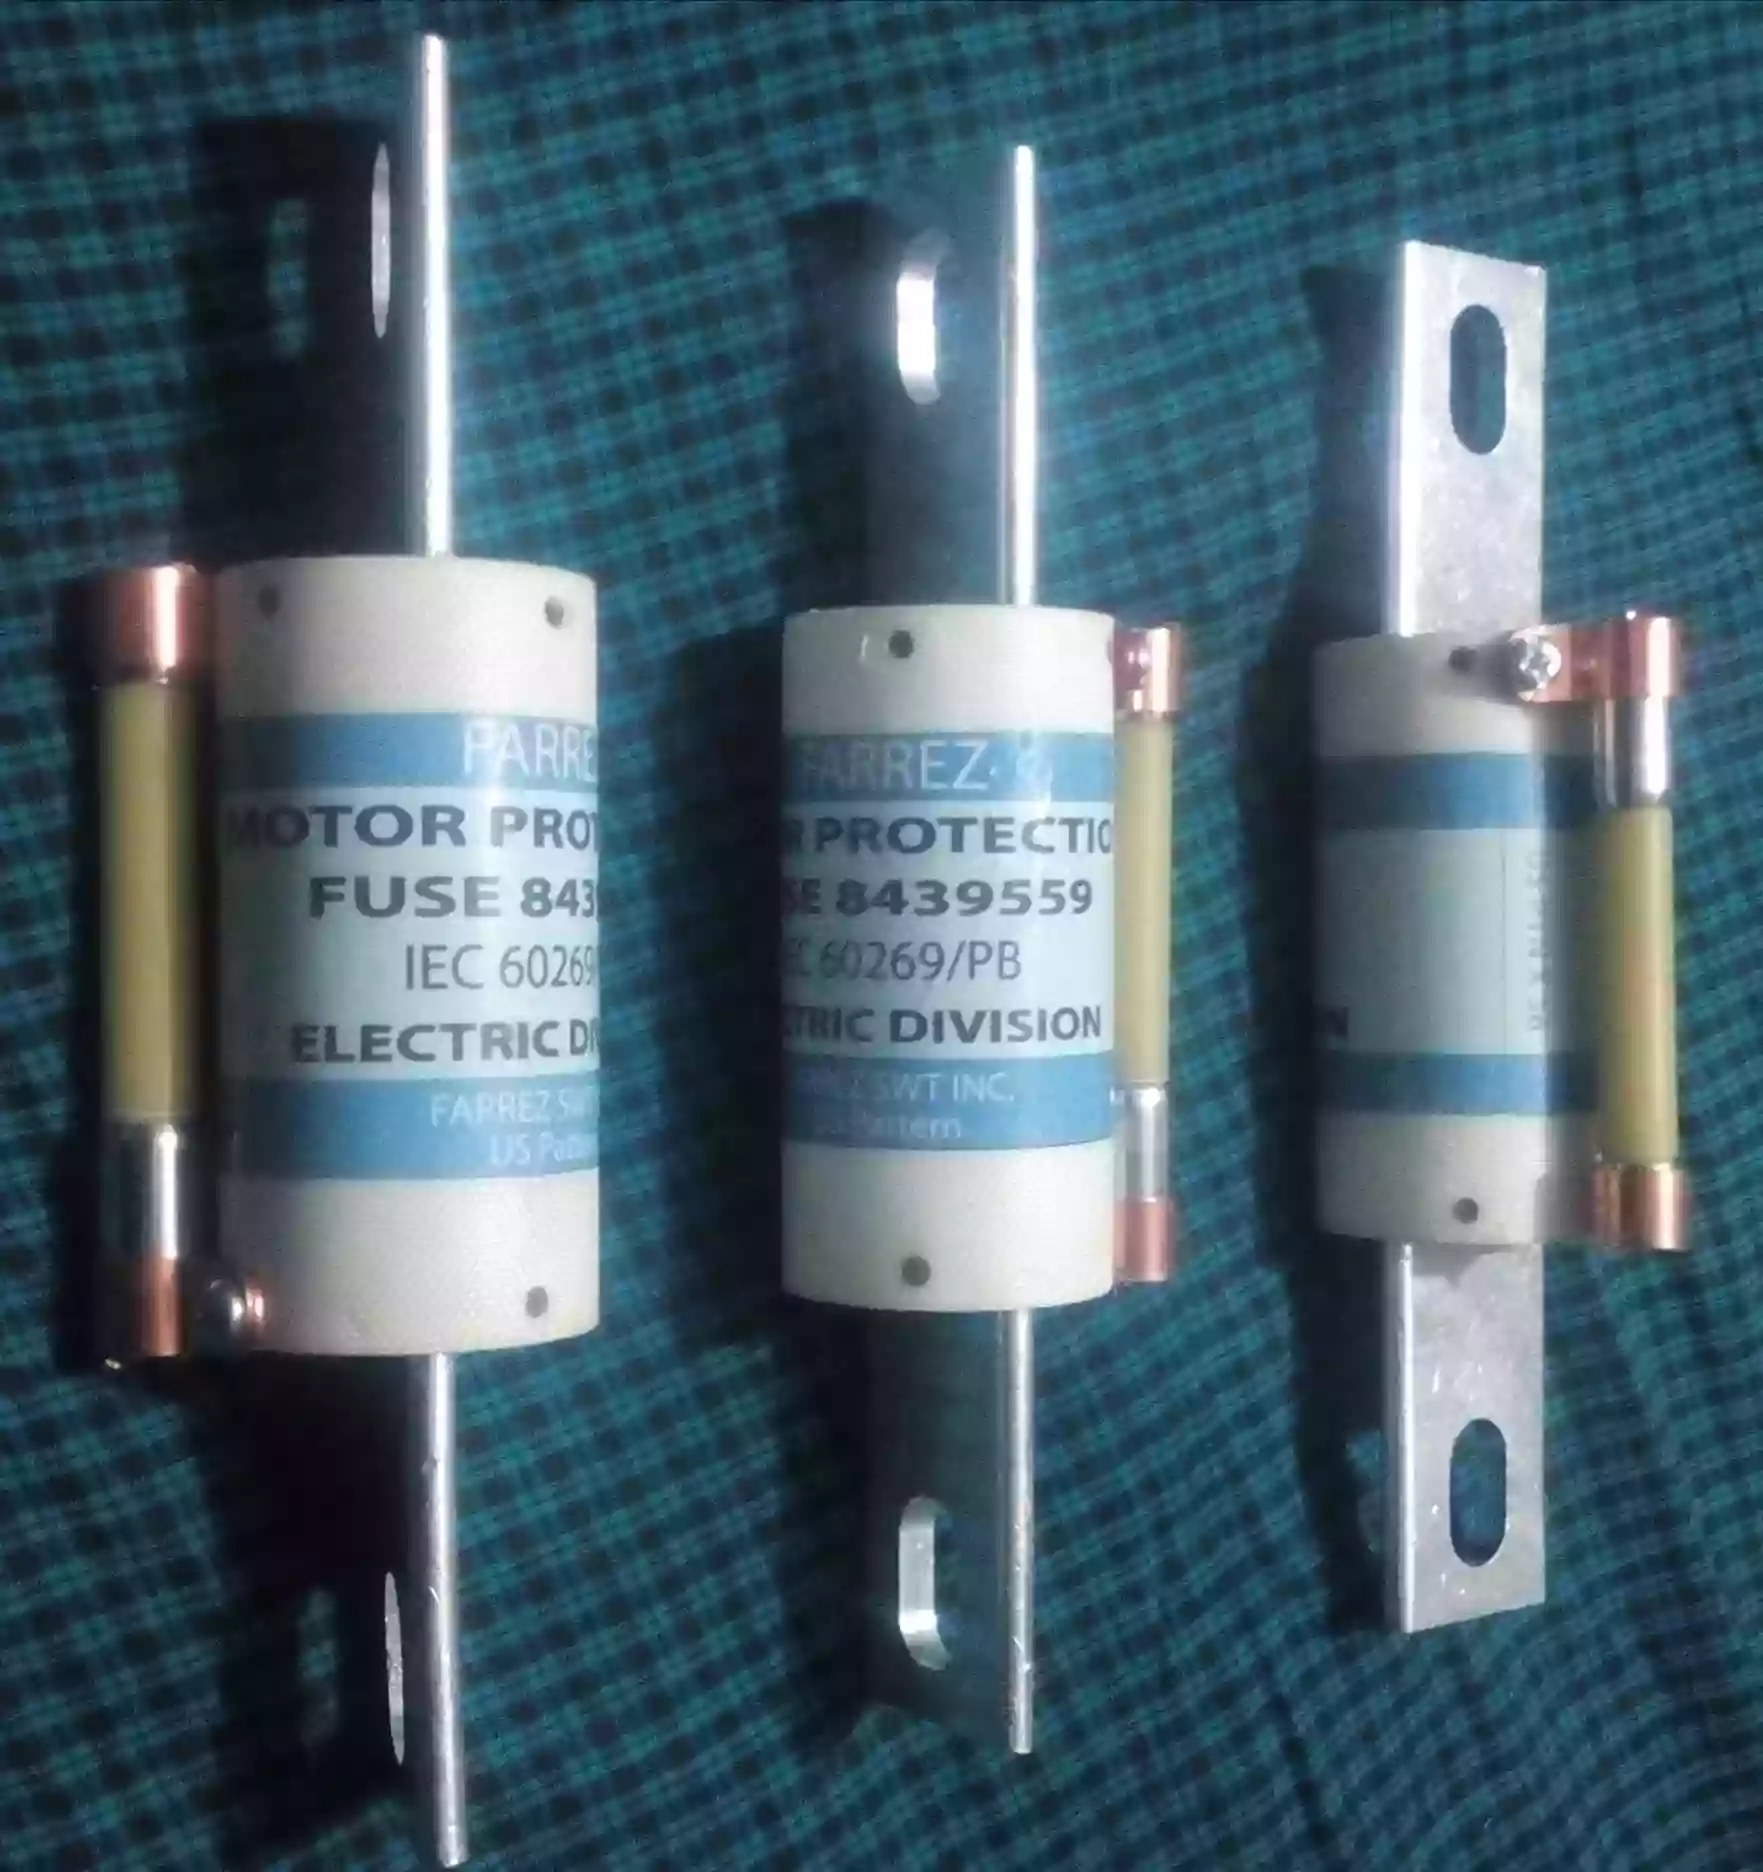 Motor Protection Fuse 8439559 Electromotive Division GM General Motors Corporation Railway spare parts available